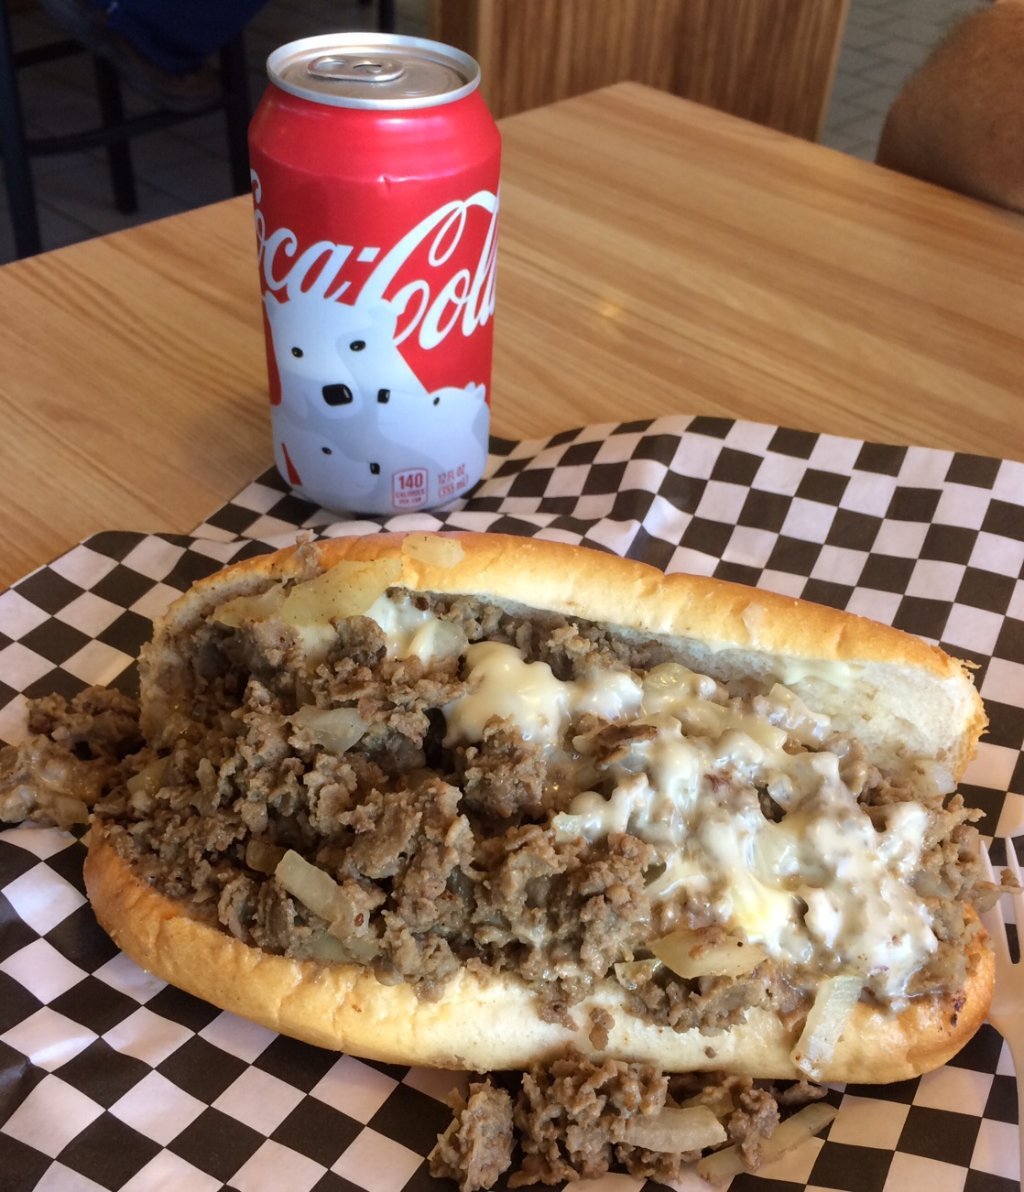 Best of Philly Cheesesteak